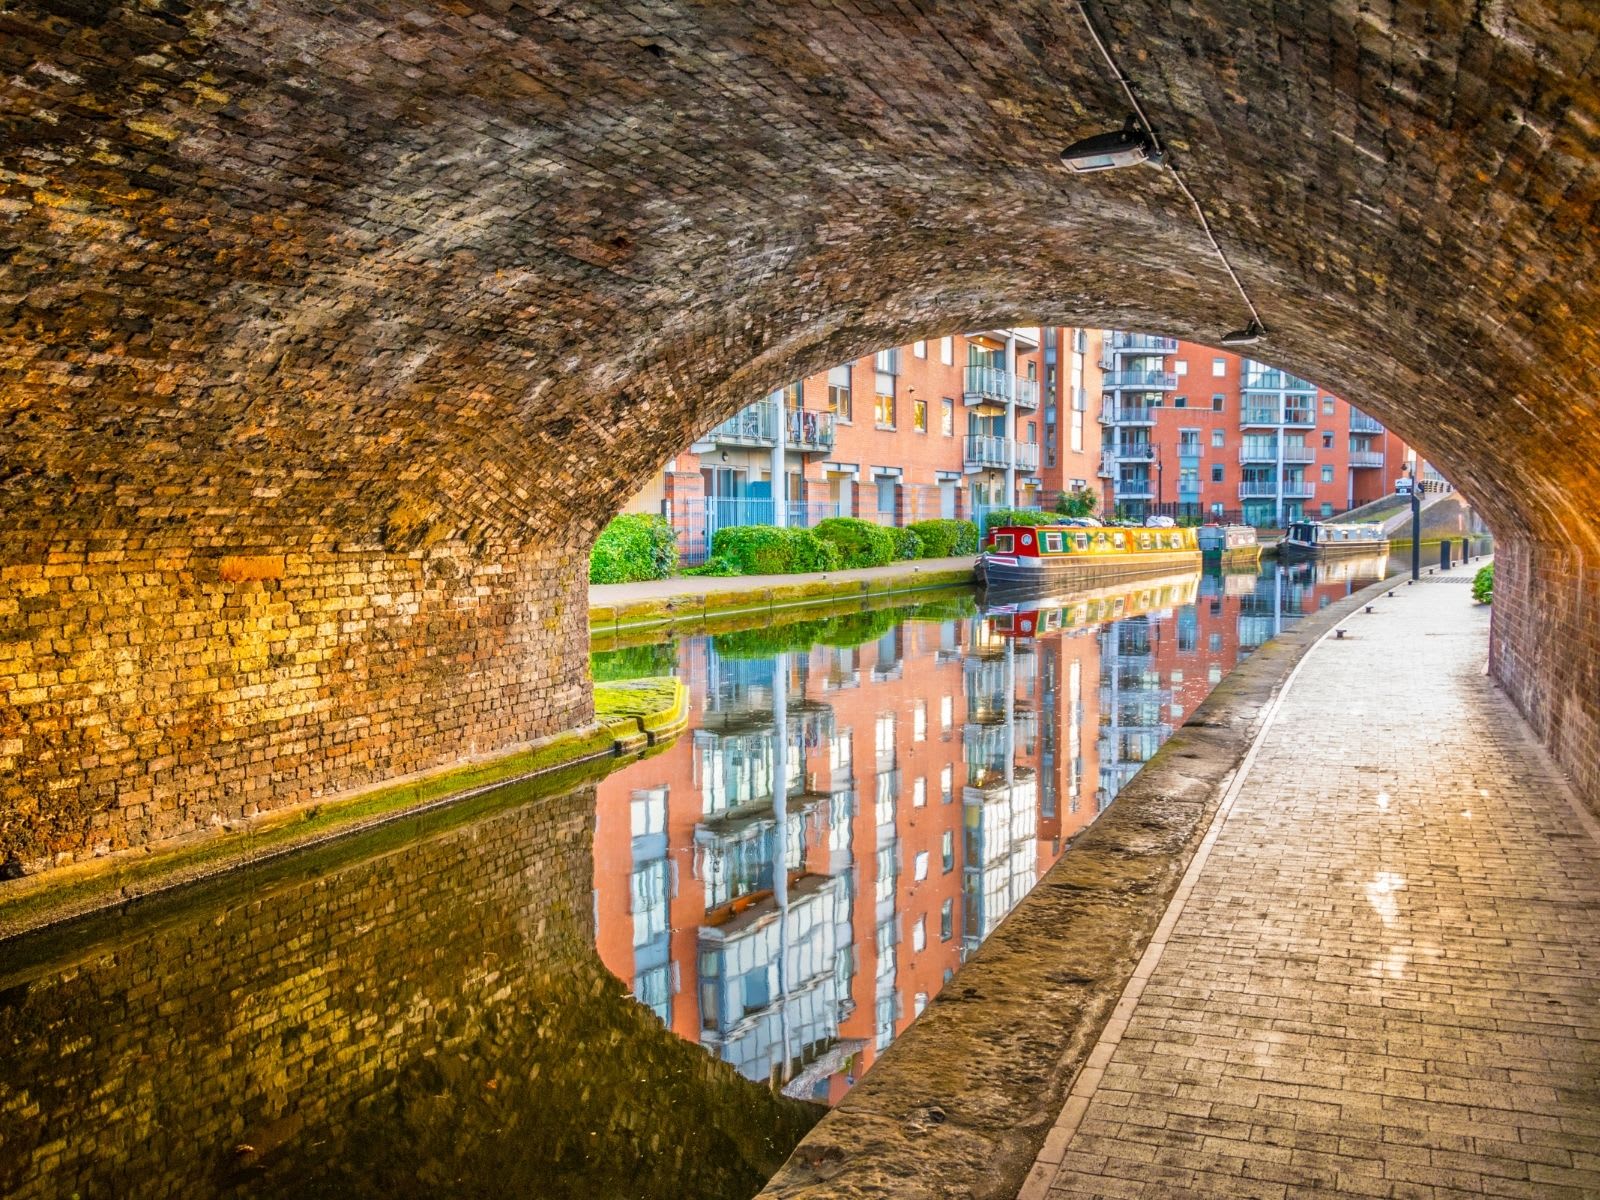 Sunset tunnel view of a water channel, Birmingham